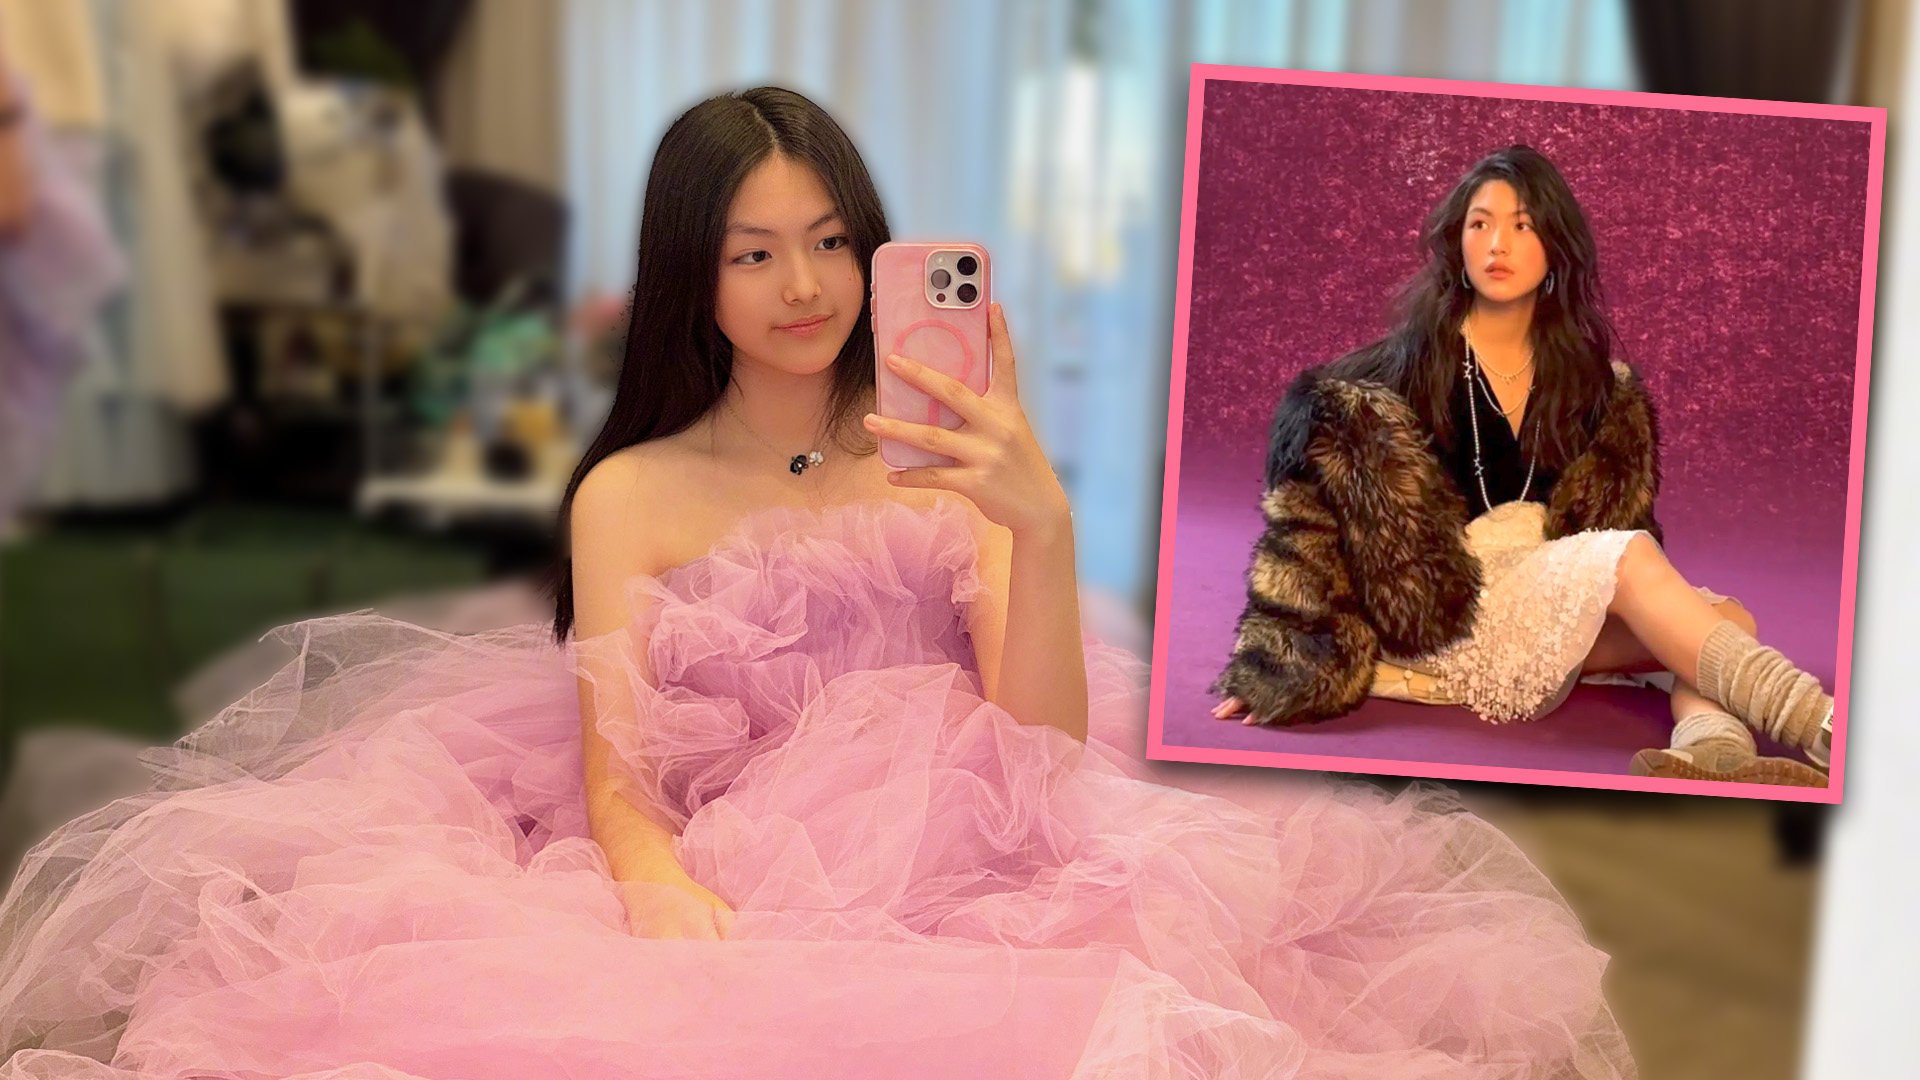 A famous former China television host and actress who flaunts her wealth by dressing her “princess” daughter head to toe in designer clothes has been slammed on mainland social media. Photo: SCMP composite/Weibo/Douyin